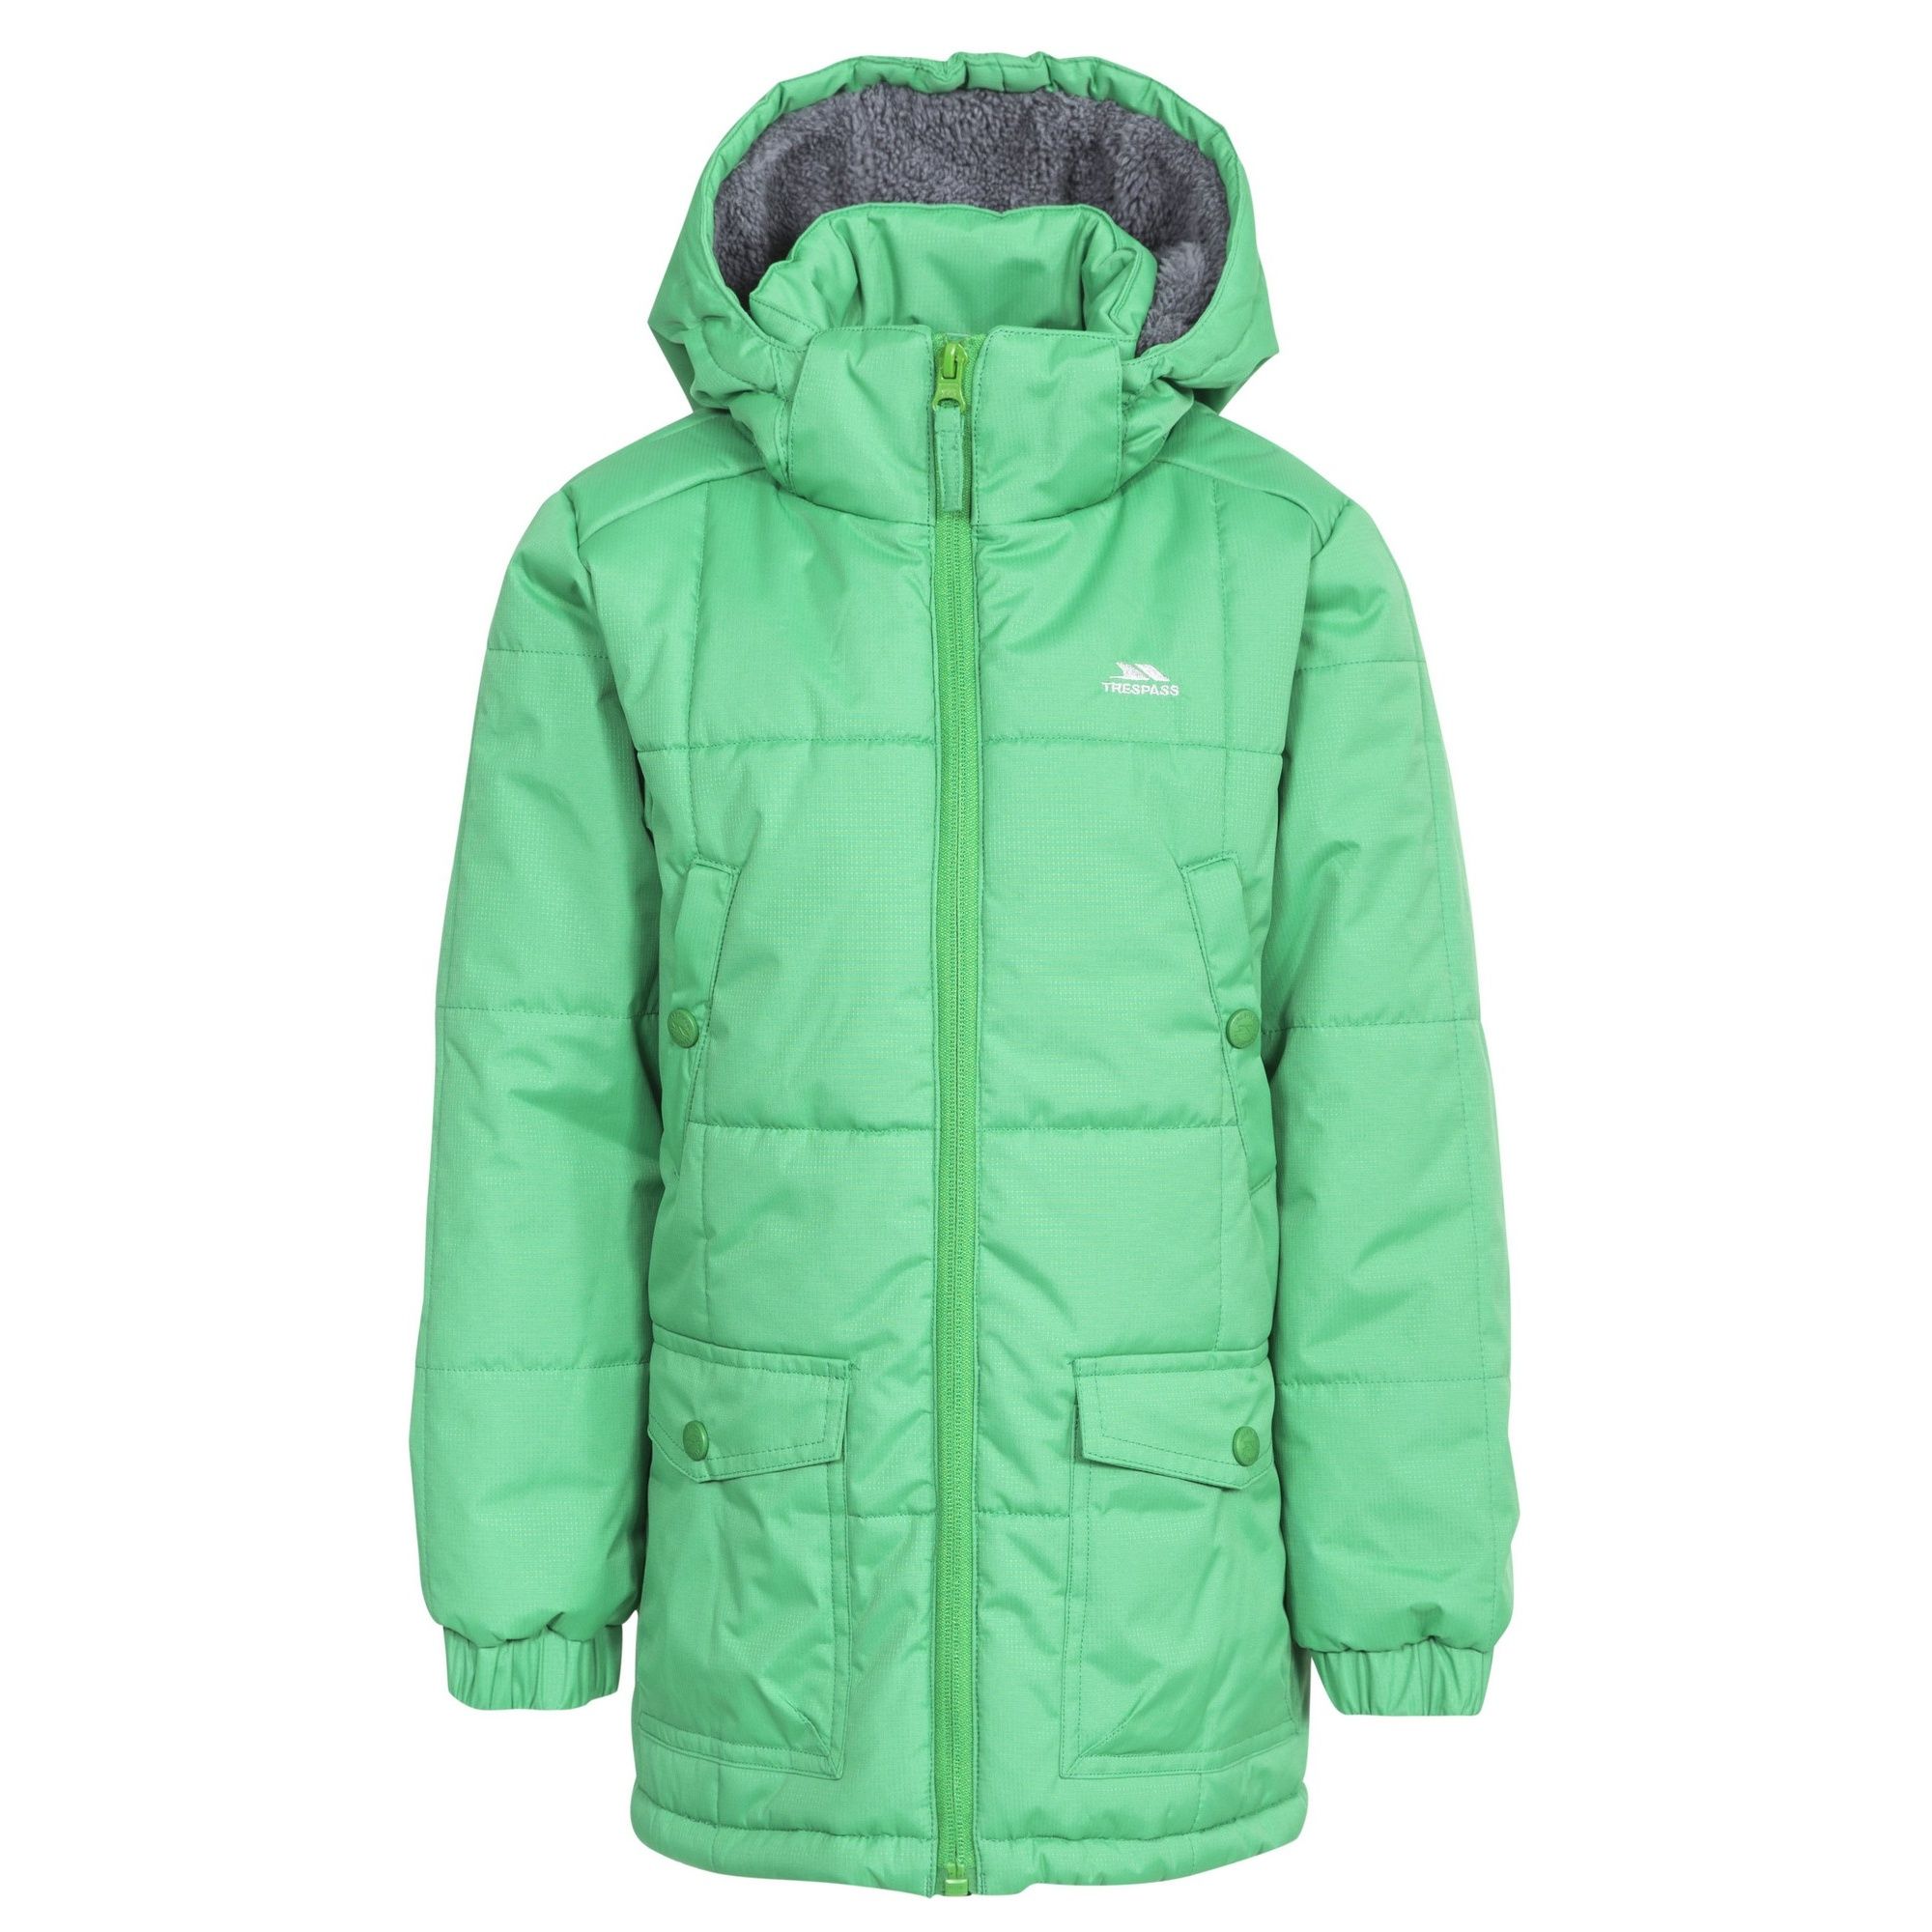 Boys padded jacket with a detachable stud off hood. Sherpa fleece lined hood. 2 patch pockets. 2 upper pockets. Elasticated cuff with touch fastening tab. Hem draw cord. Waterproof to 2000mm and windproof. Shell: 100% polyester PVC coating, Lining: 100% polyester, Filling: 100% polyester.